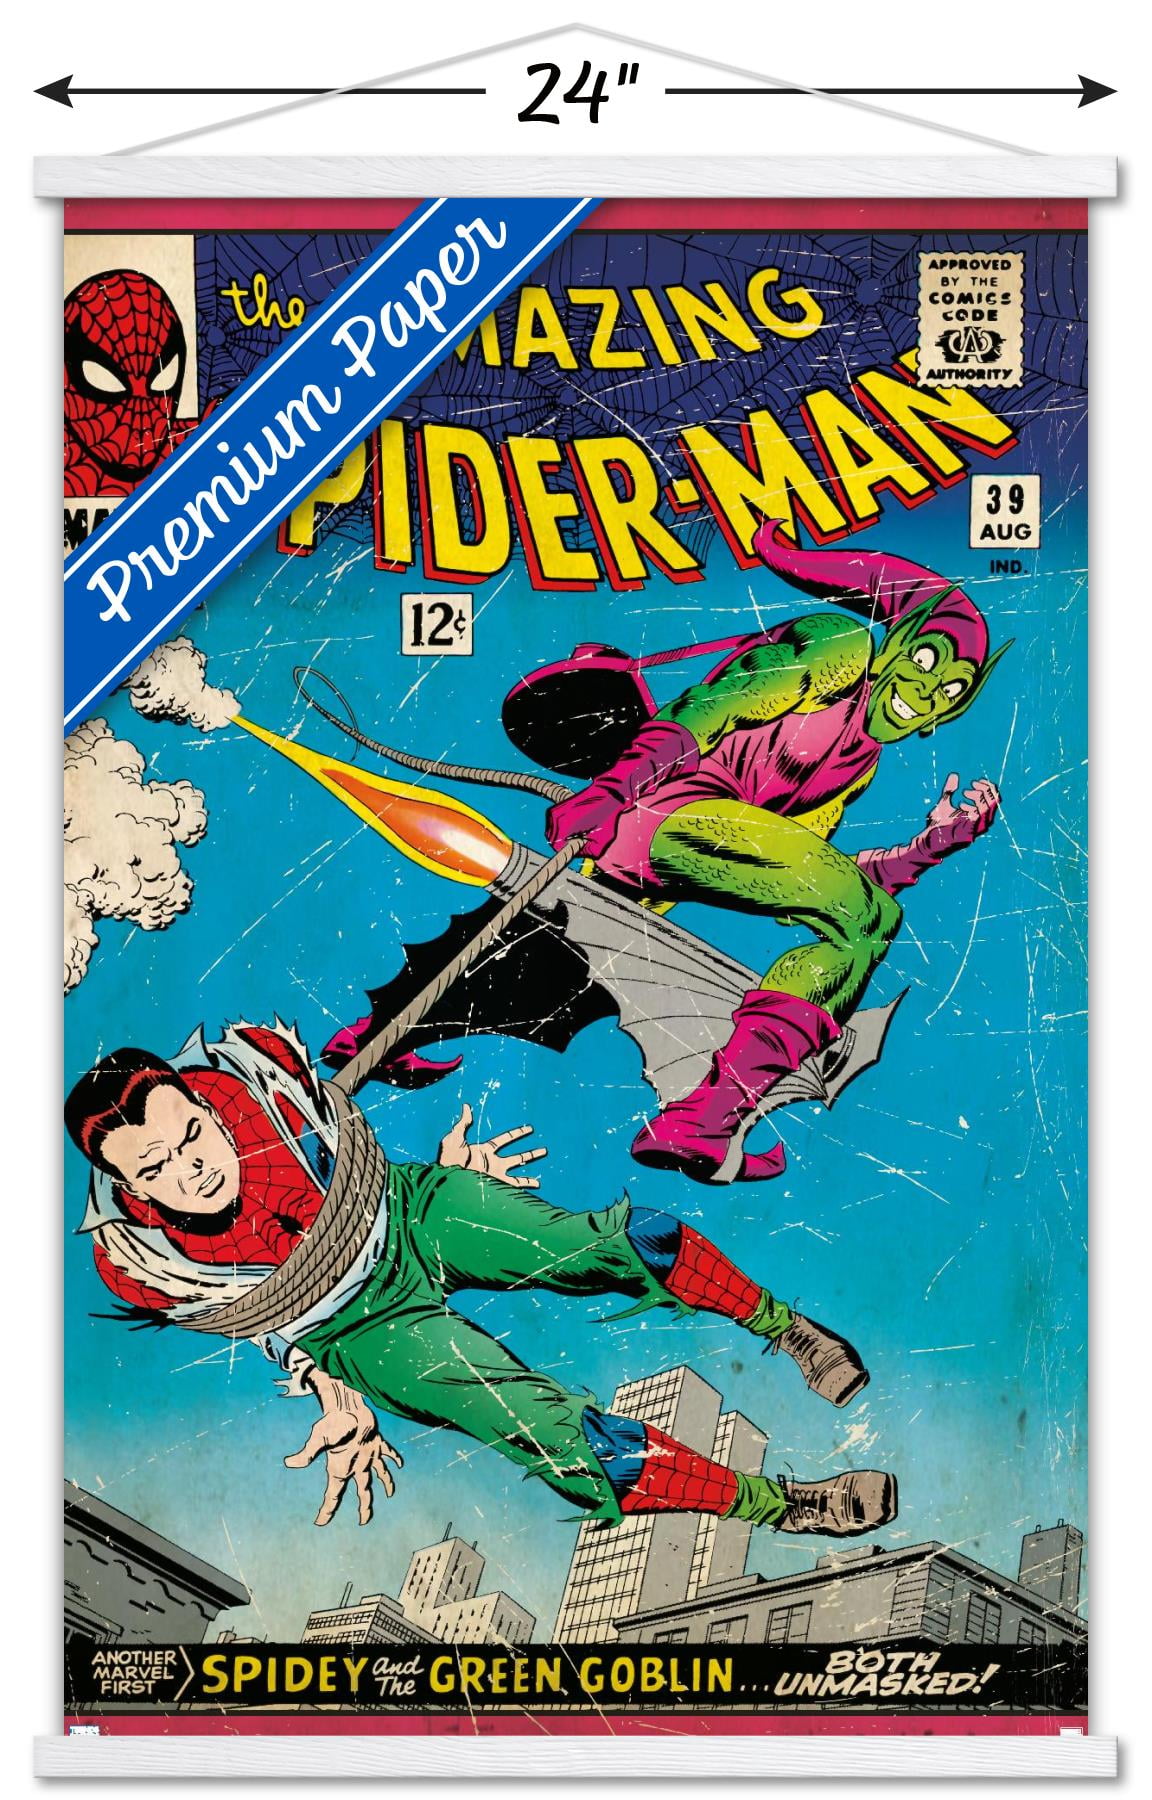 The Amazing Spider-Man #39 Reviews